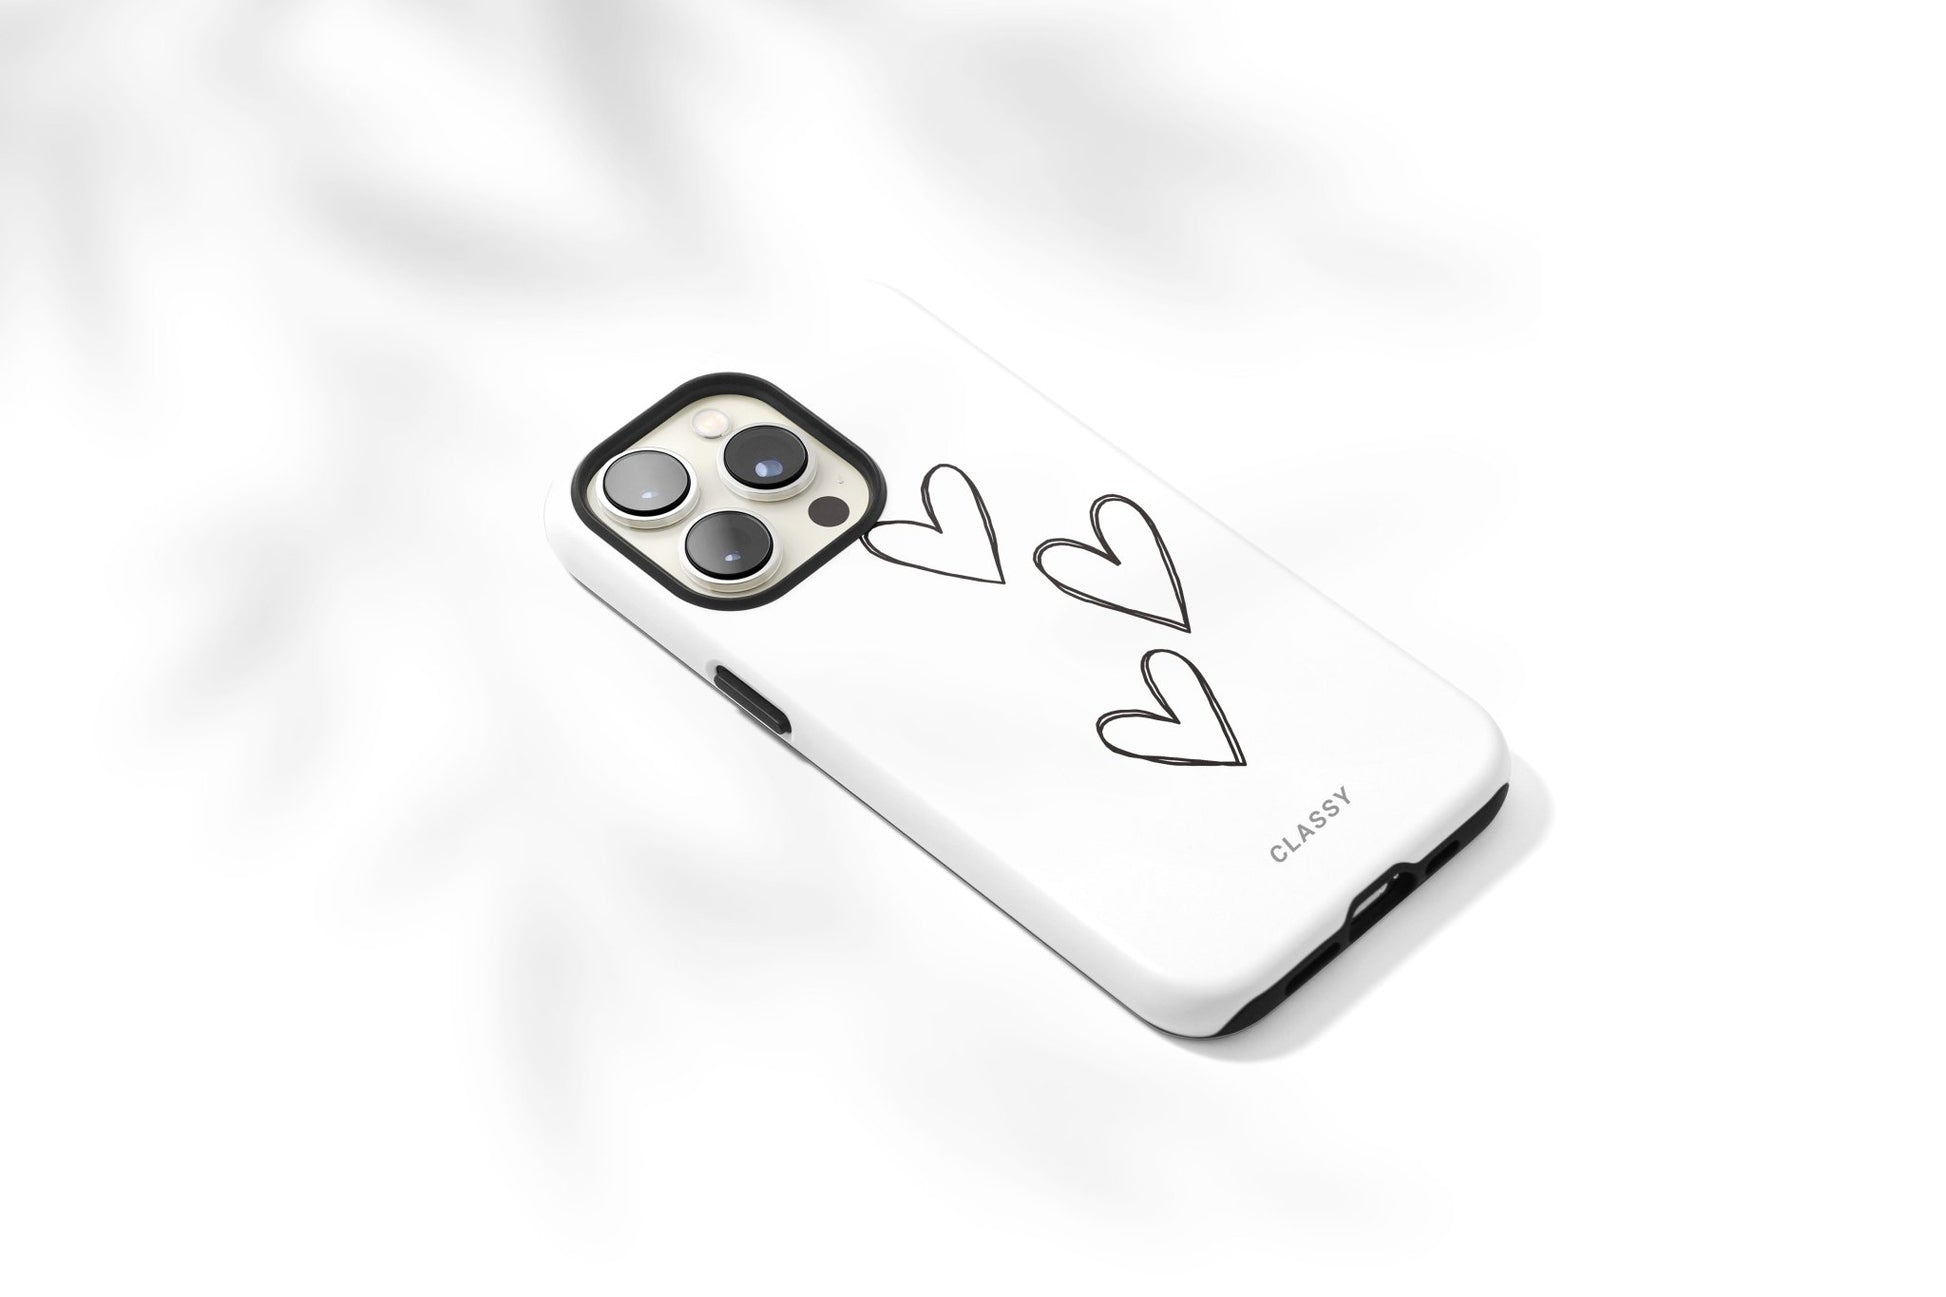 White Couple Heart Tough Case - Classy Cases - Phone Case - iPhone 12 Pro Max - Glossy -